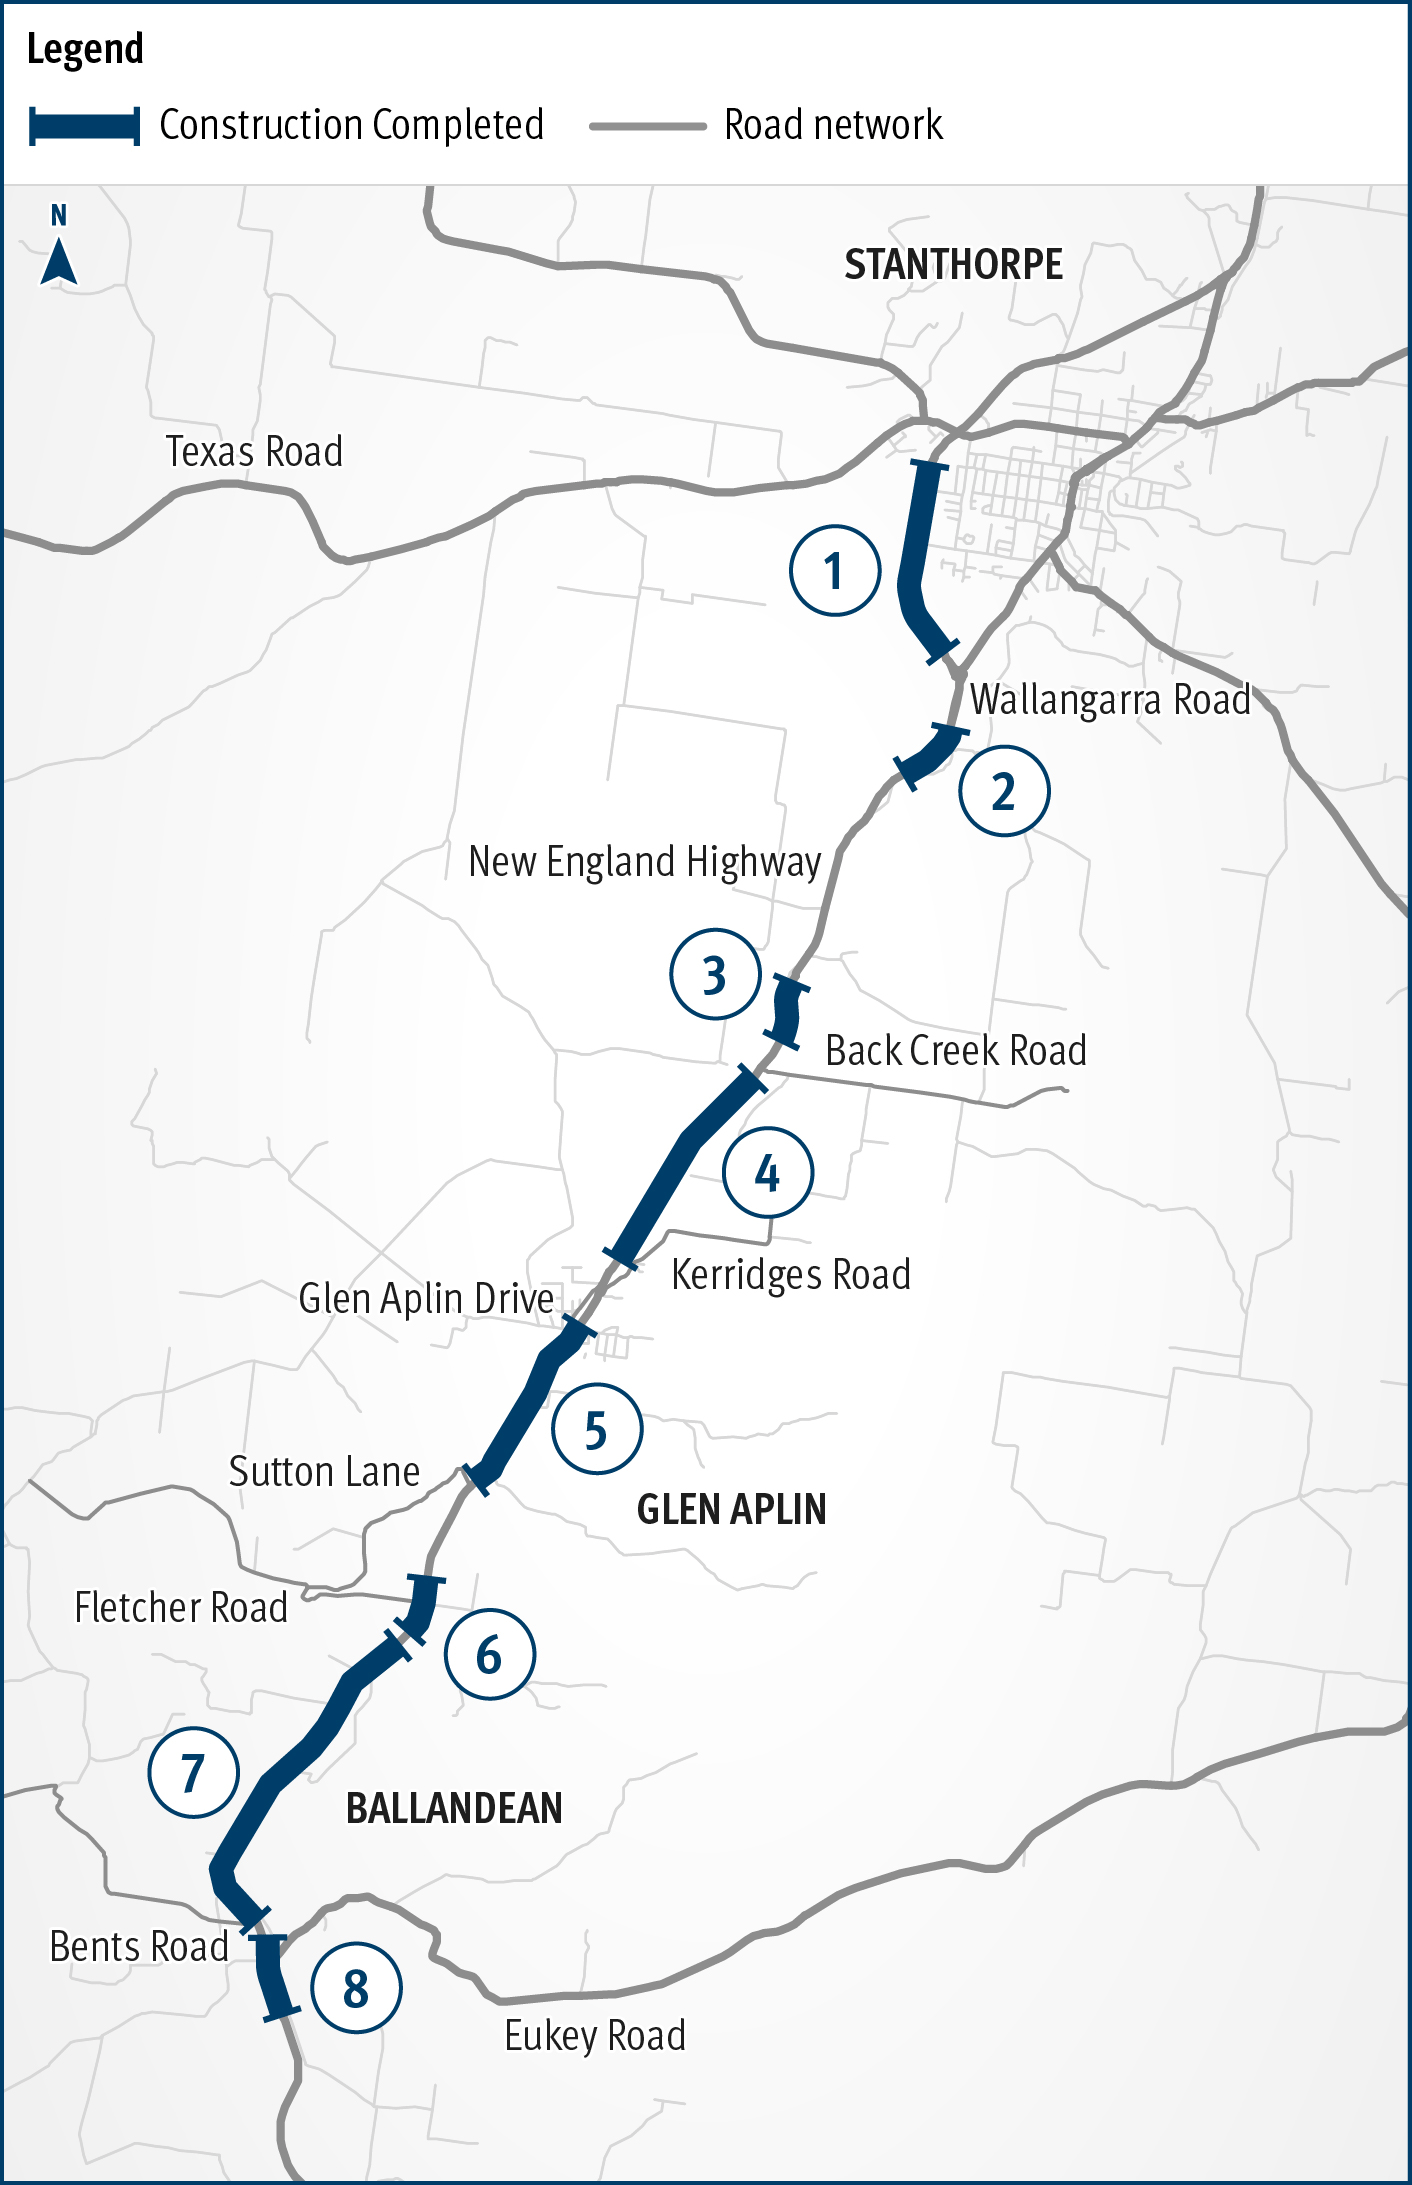 The map shows the locality of works completed to improve safety on the New England Highway between Stanthorpe and Ballandean. Solid dark blue lines indicate eight packages of work. Places included on the map from north to south include Stanthorpe, Glen Aplin and Ballandean. The maps also indicates the location of select roads that intersect with New England Highway including Texas Road, Wallangarra Road, Back Creek Road, Kerridges Road, Glen Aplin Drive, Sutton Lane, Fletcher Road and Eukey Road.